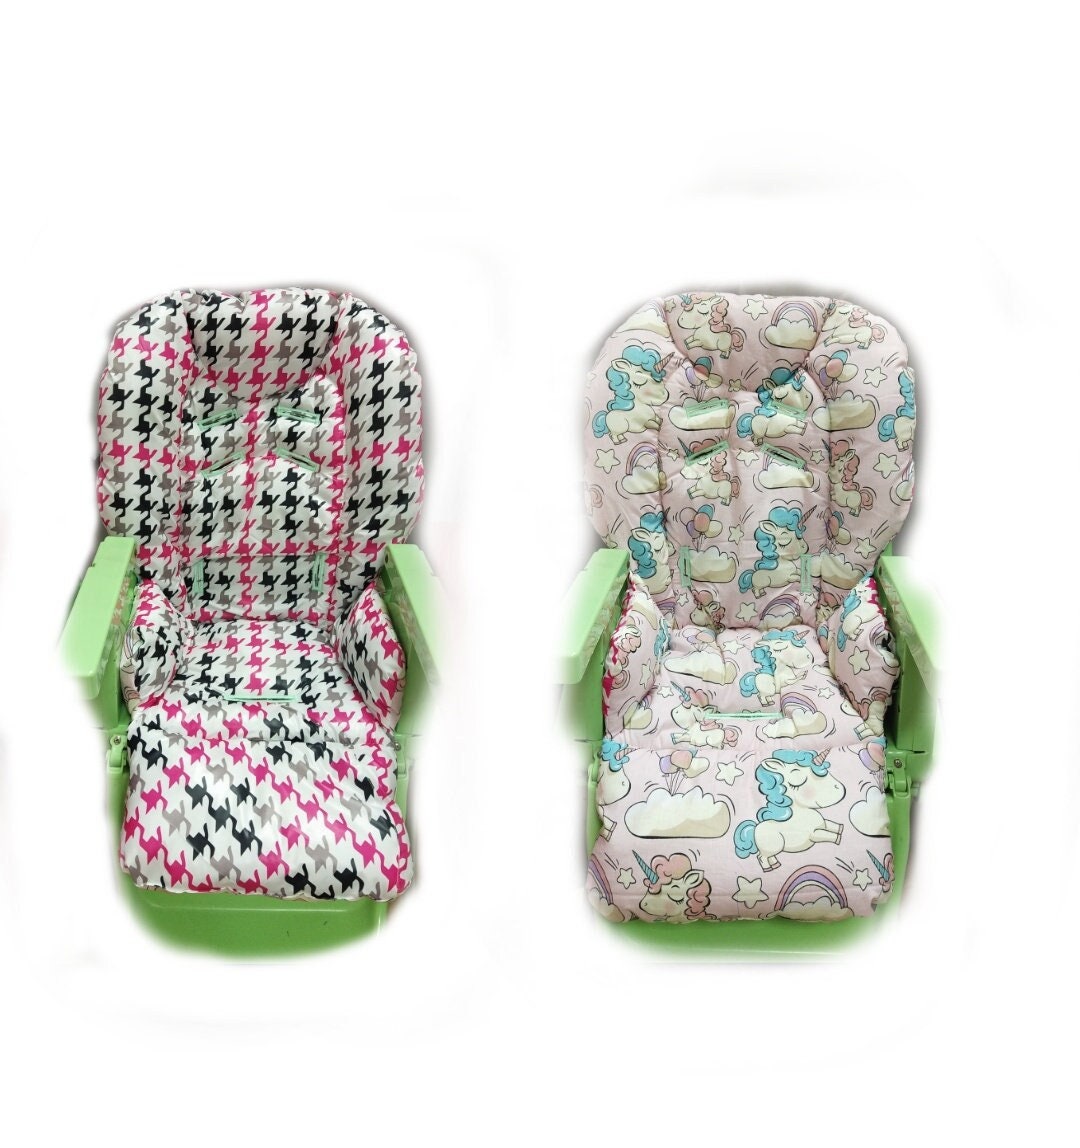 Housse chaise haute Chicco Polly 2 in 1 (+ Babymoov & Graco)